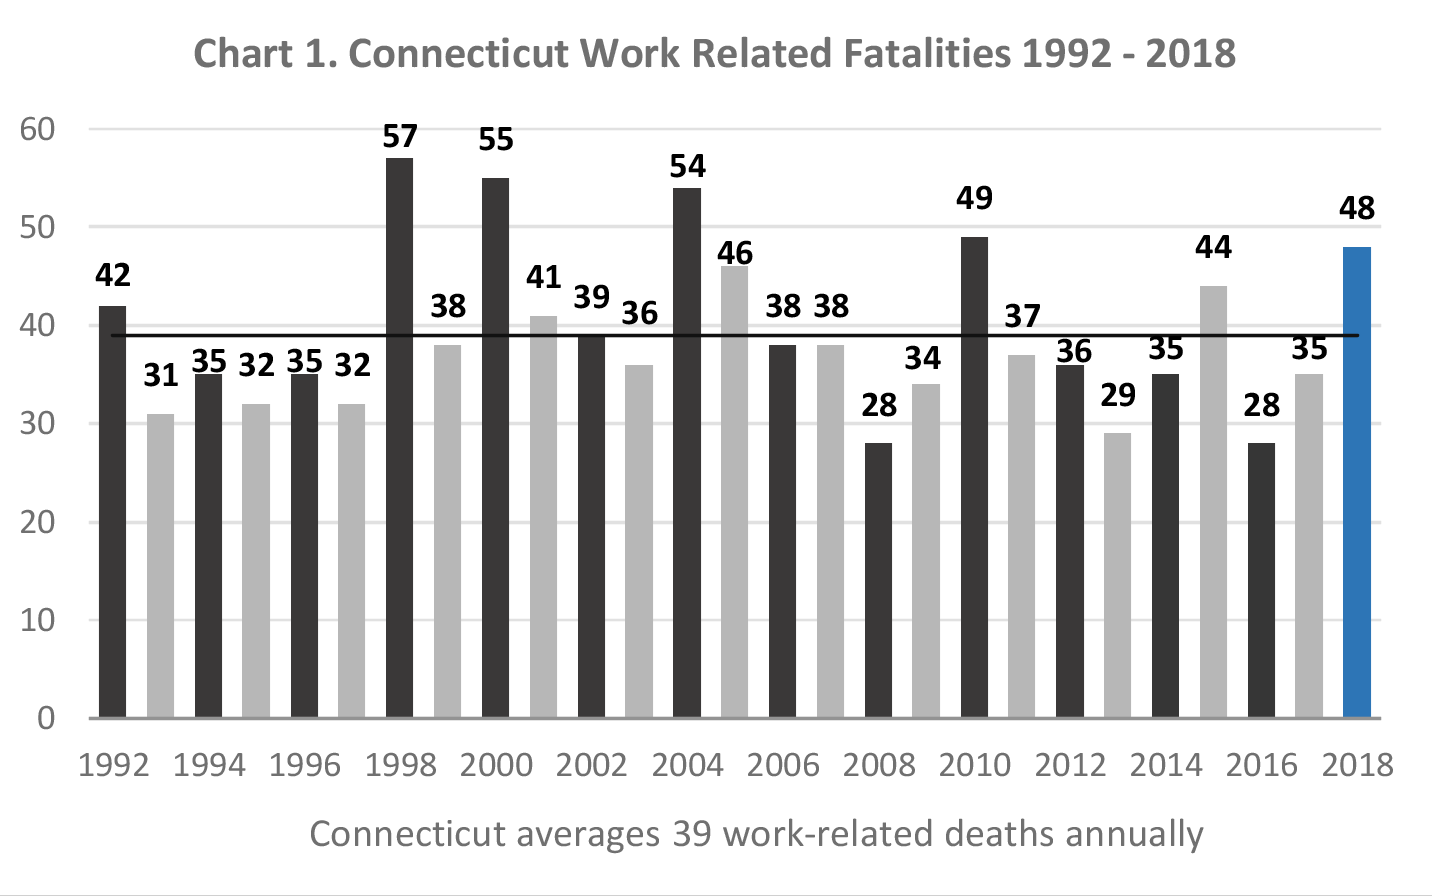 Chart 1. Connecticut Work Related Fatalities 1992-2018